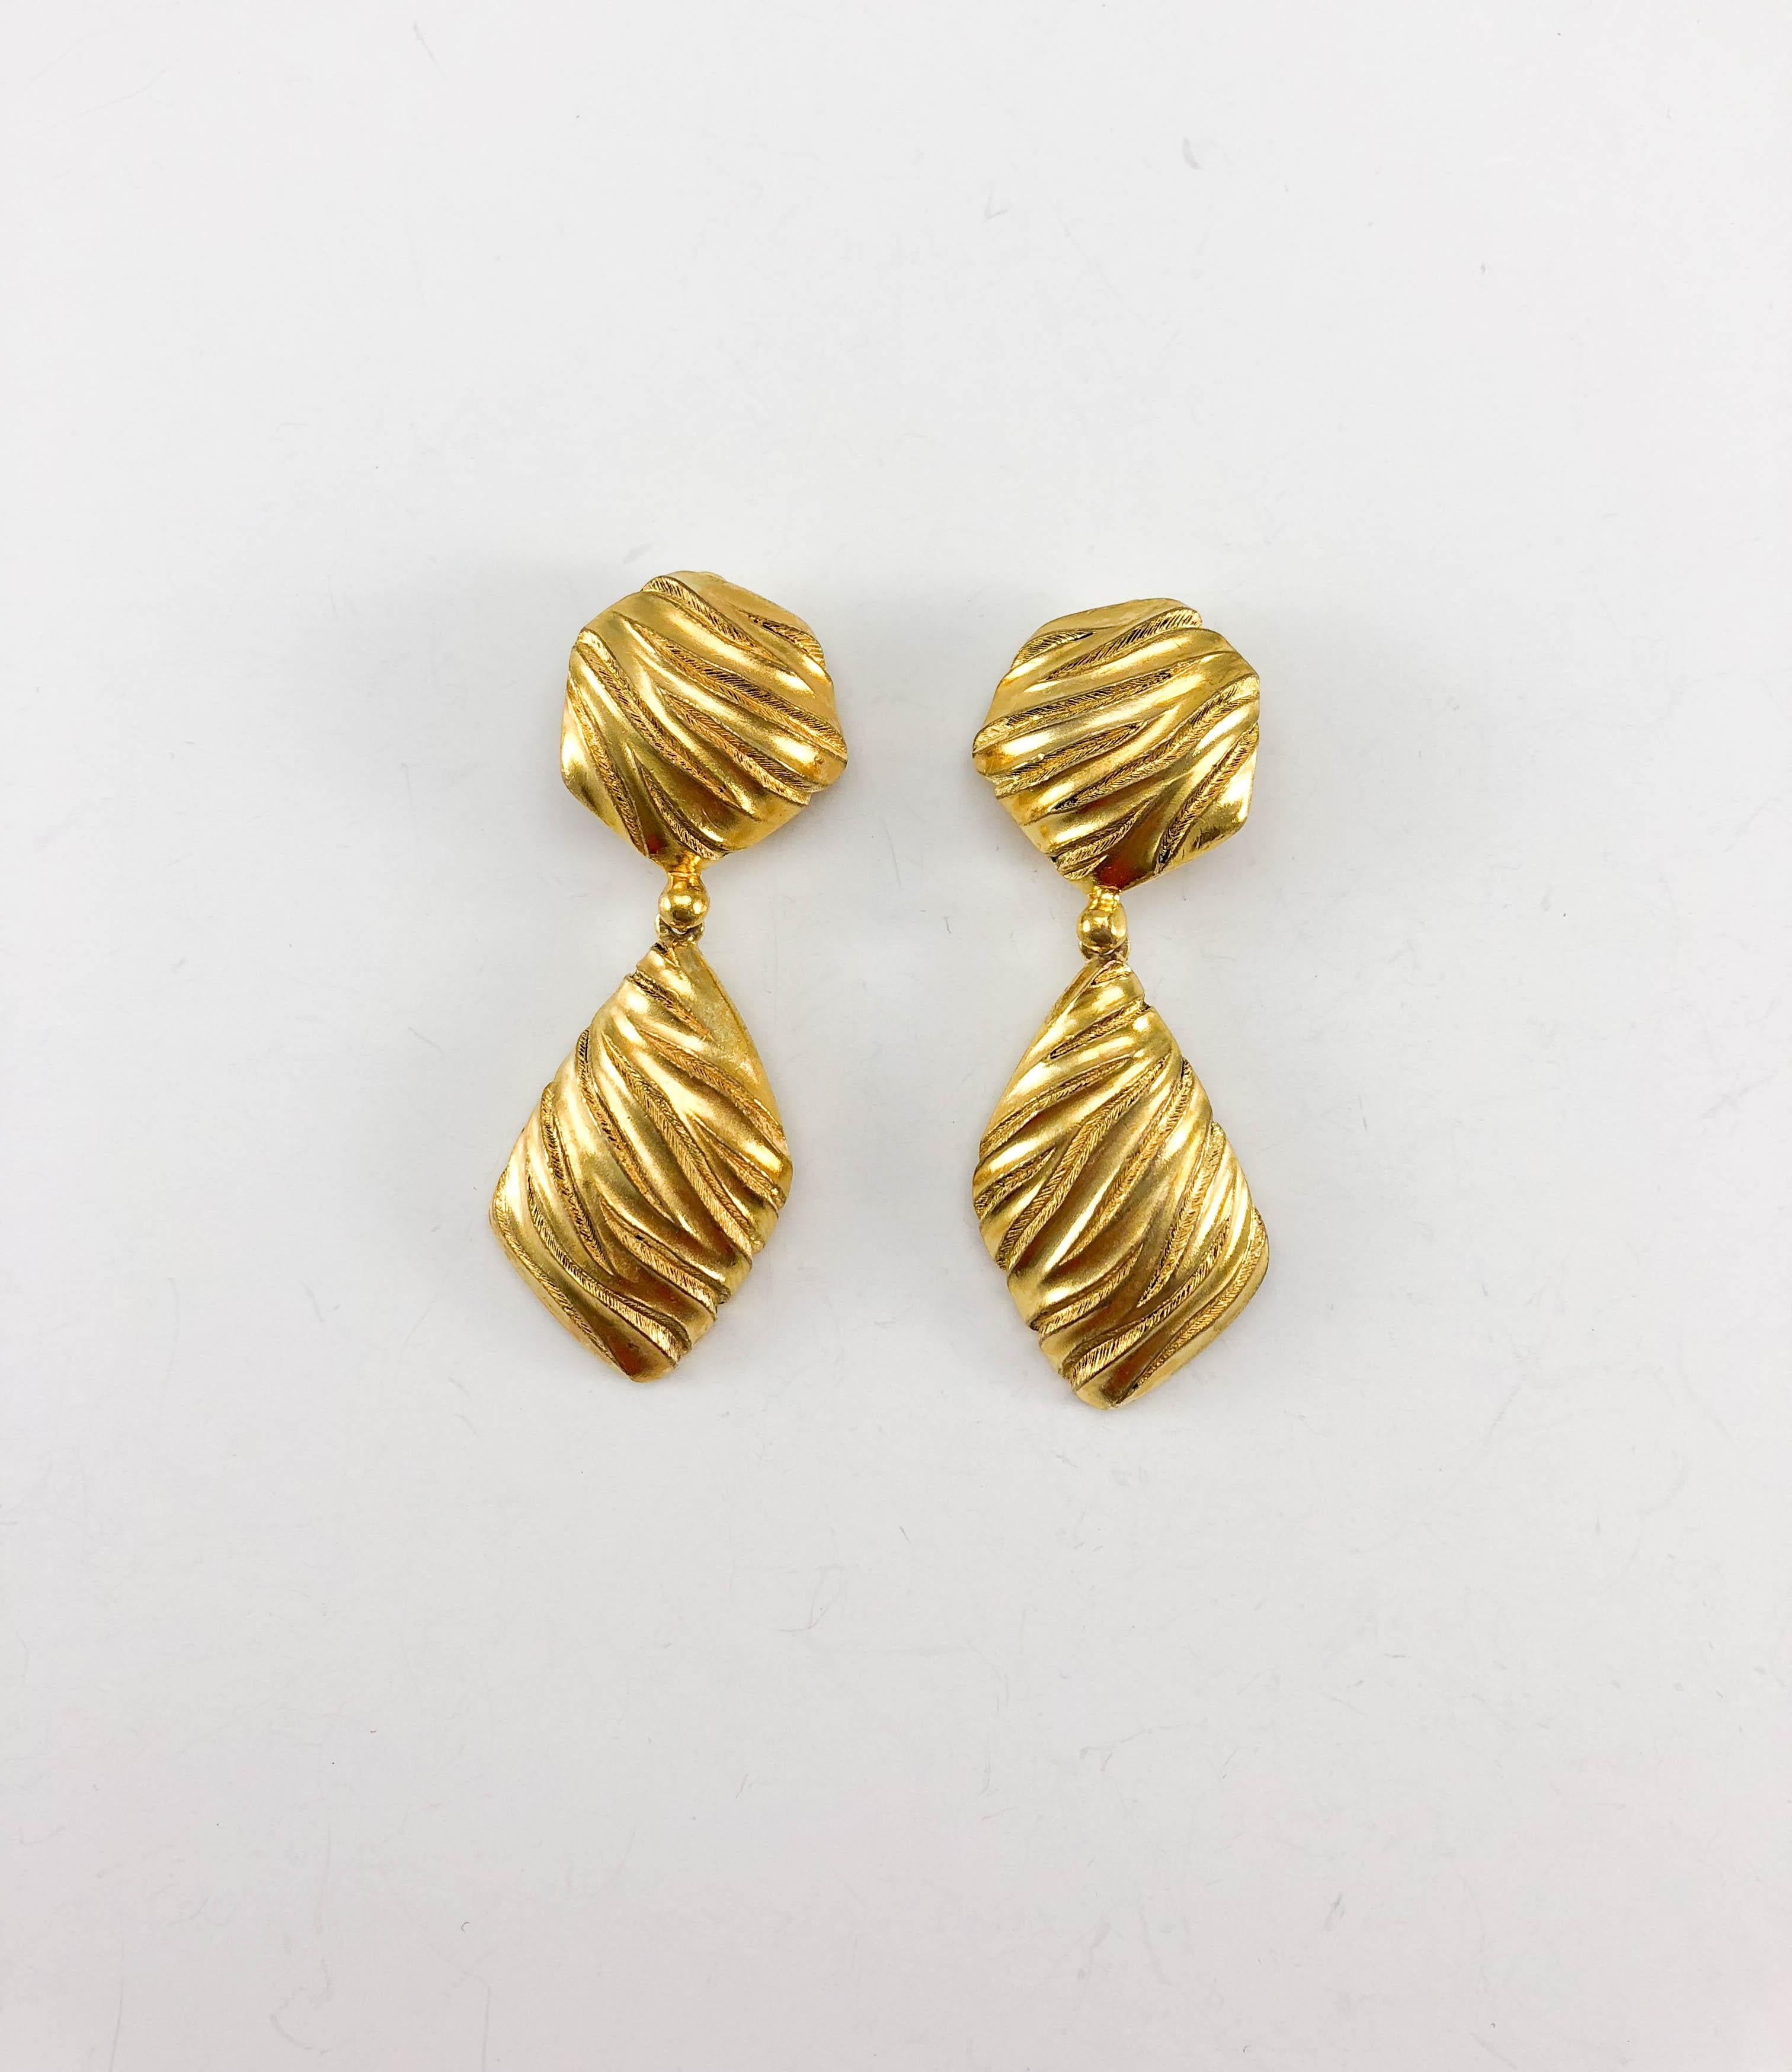 Vintage Yves Saint Laurent Gold-Plated Ribbed Dangling Earrings. These striking earrings by Yves Saint Laurent date back from the 1980’s. Made in gold-plated metal, the ribbing is animal-print inspired. YSL signed on the back. Bold, yet elegant,